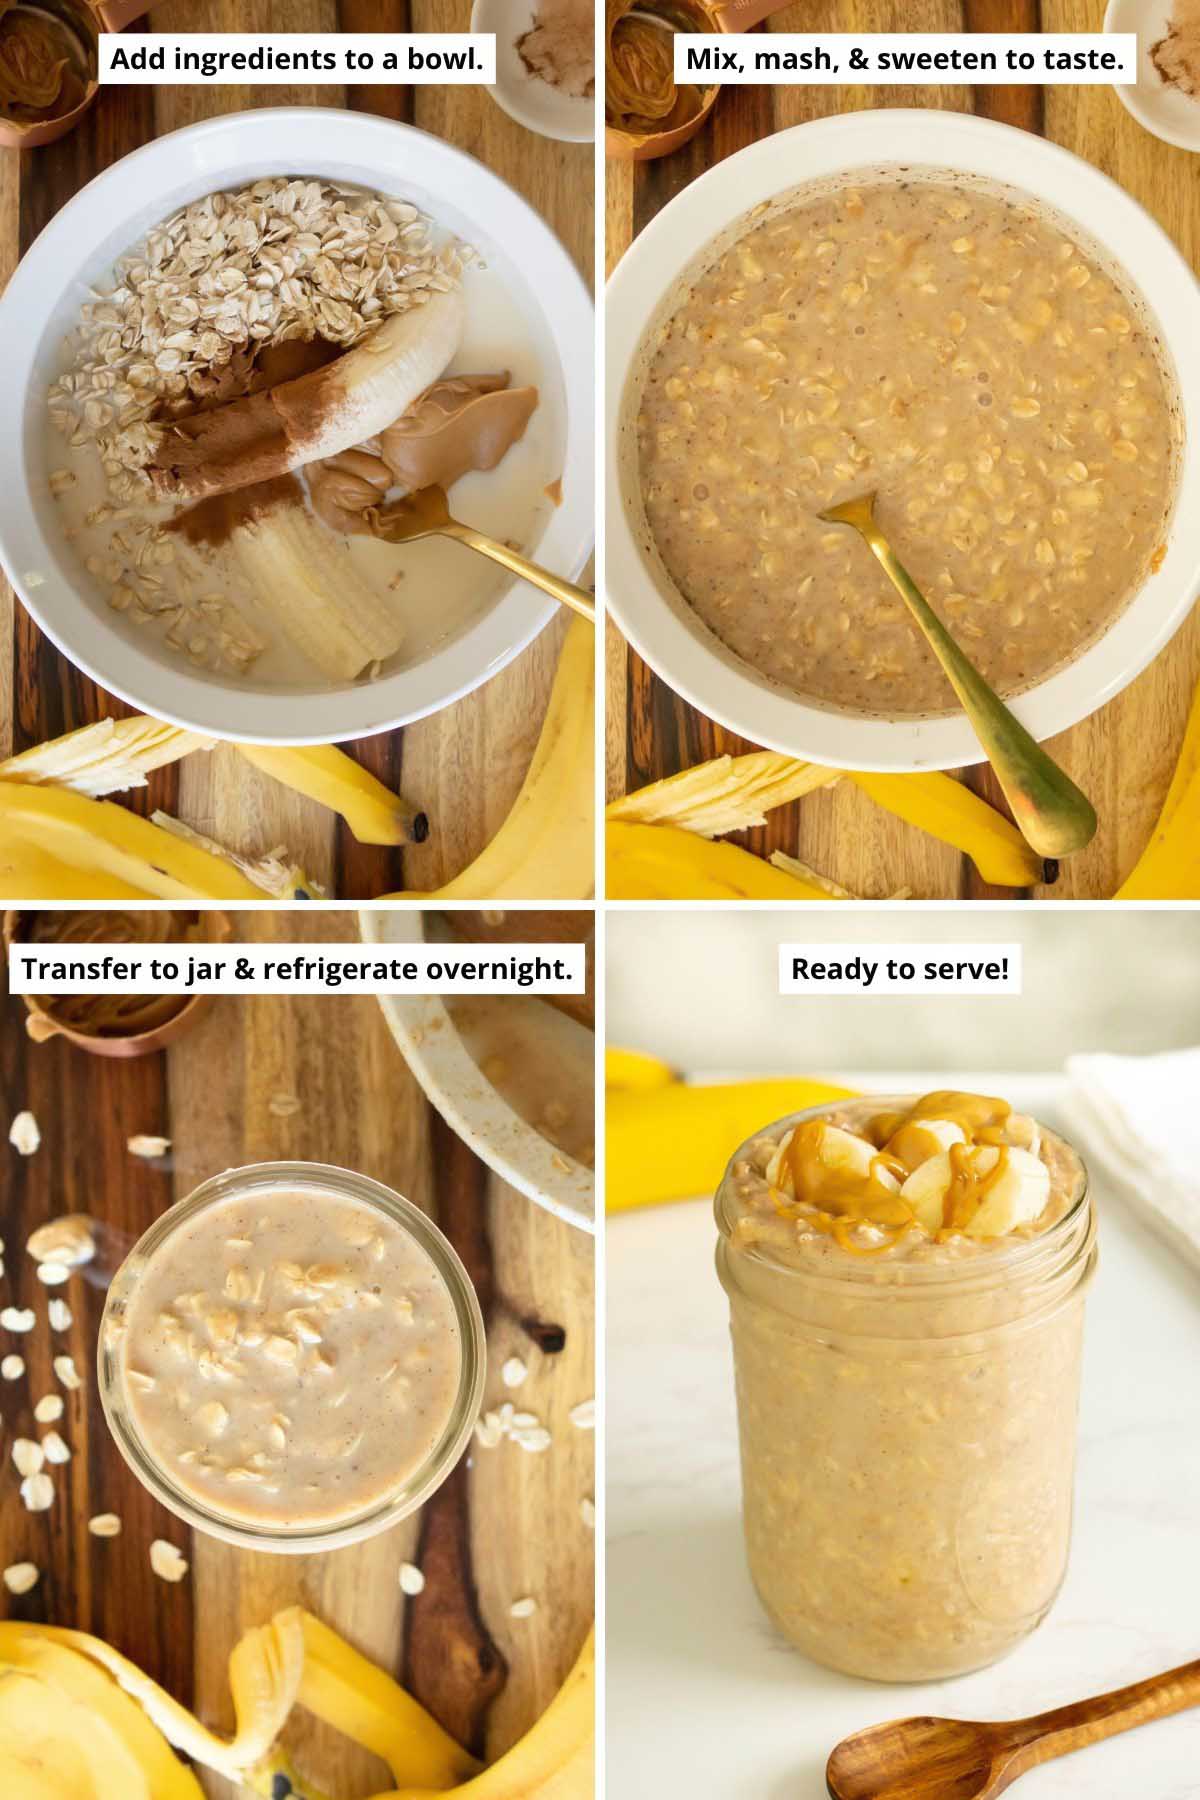 image collage showing the bananas and peanut butter in a mixing bowl before mashing with the oats and other ingredients, the oat mixture transferred to a jar before chilling overnight, and the finished overnight oats in a jar on a white table